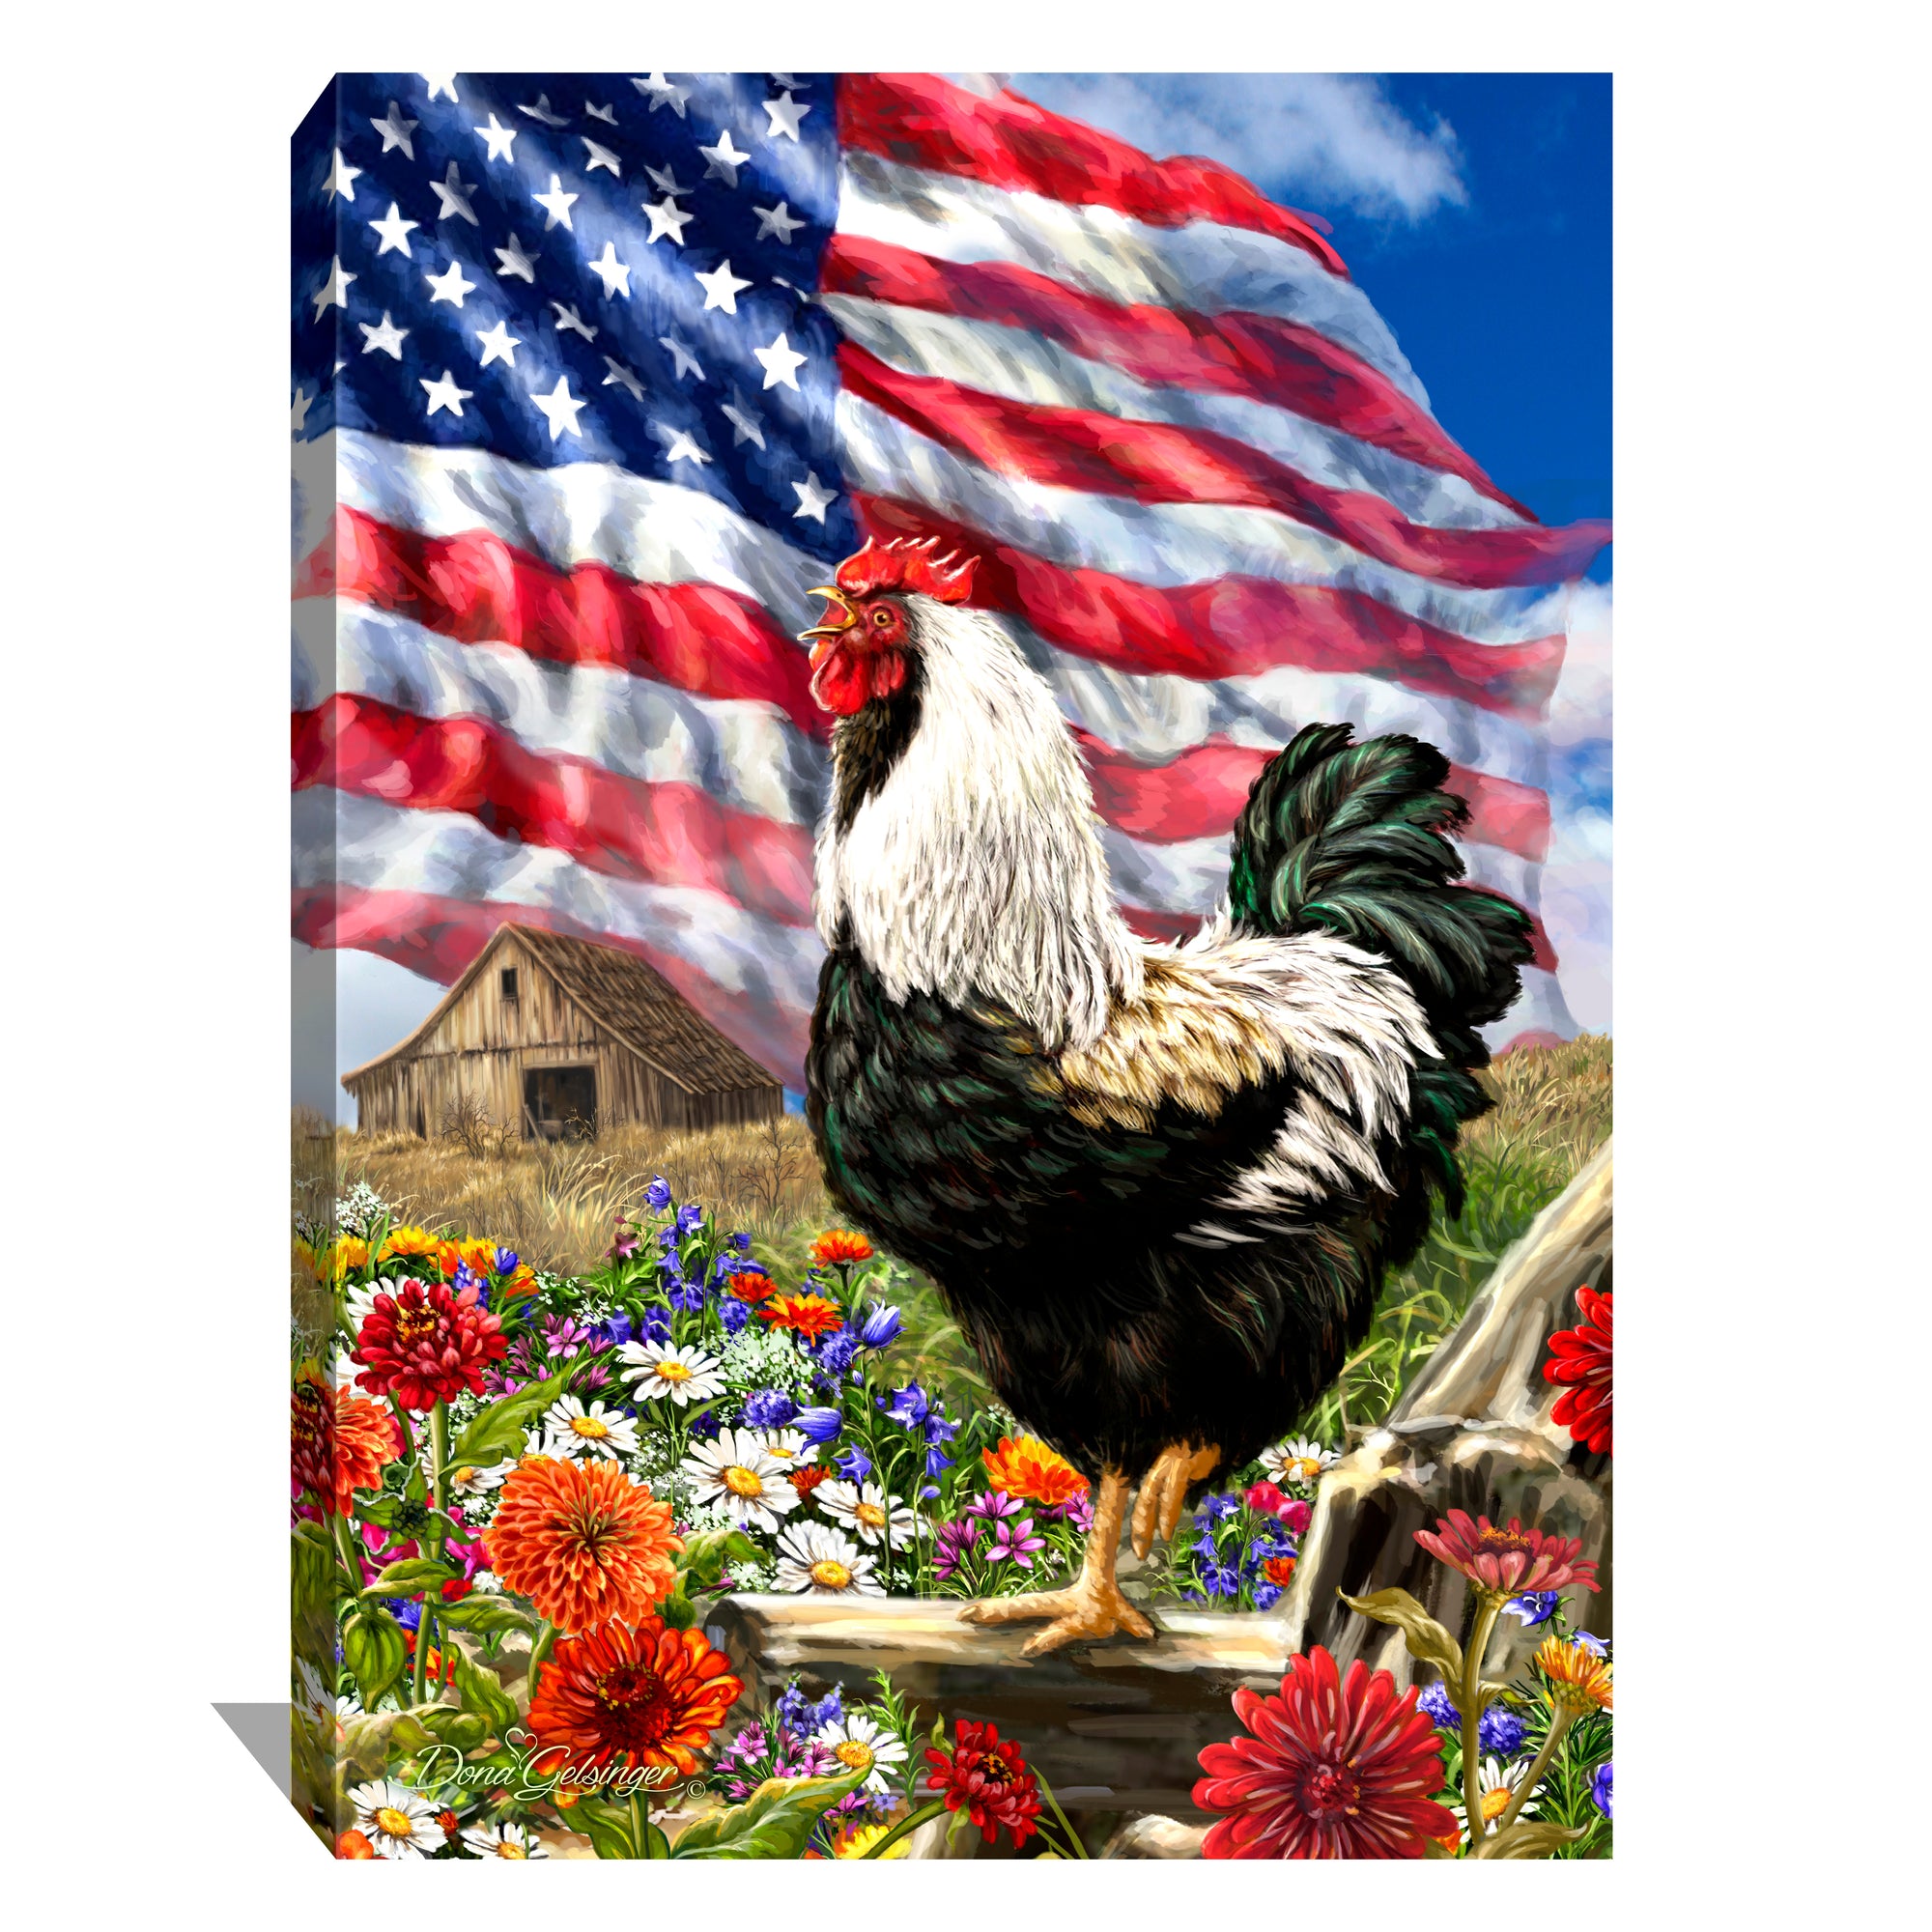 Morning in America Canvas Wall Art